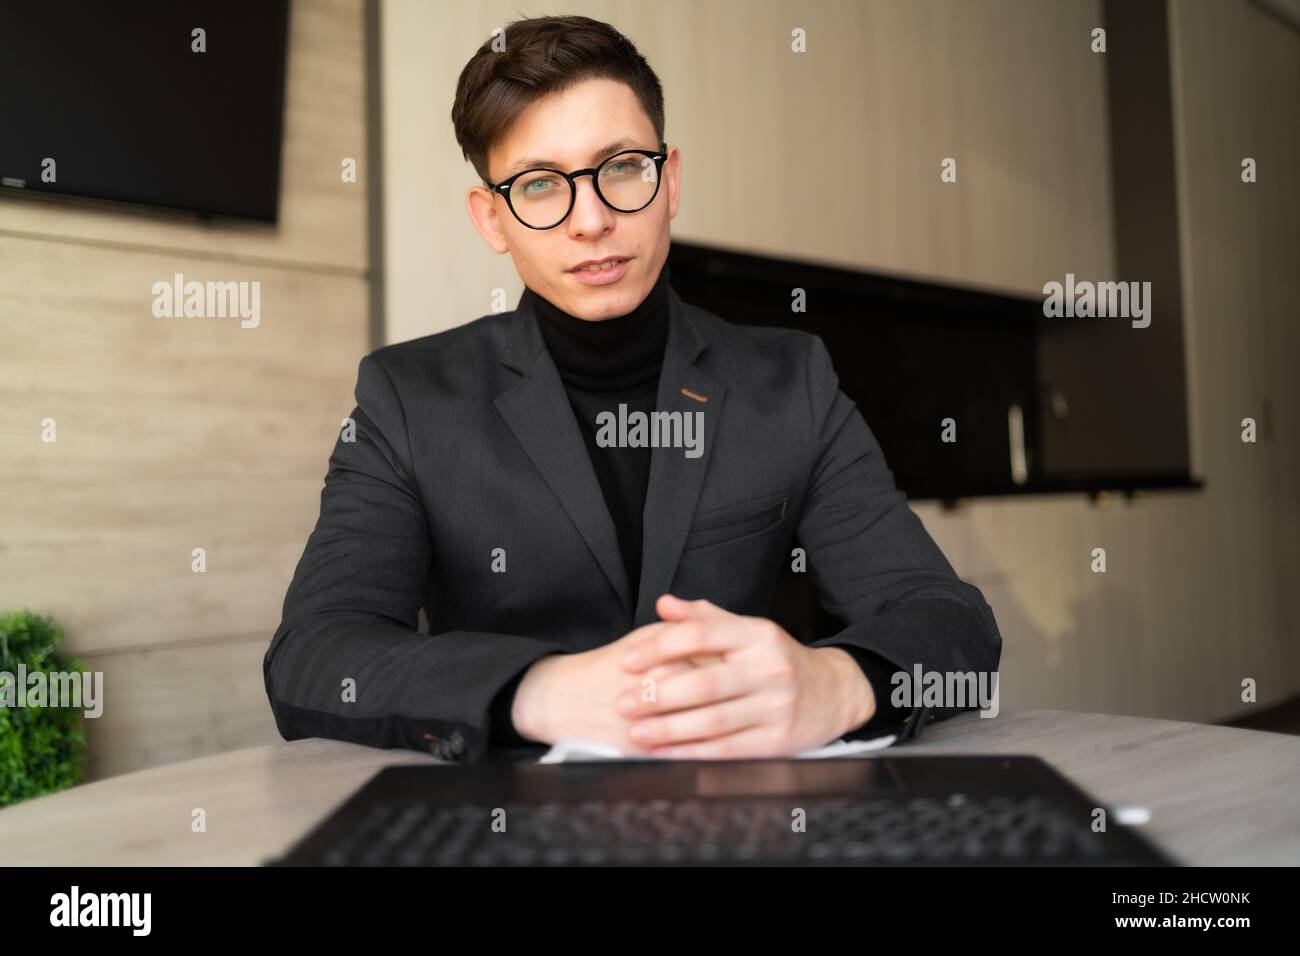 male coach teacher webinar talking looking camera giving online class a lecture, webcam view, conference video chat call, entrepreneur or businessman Stock Photo